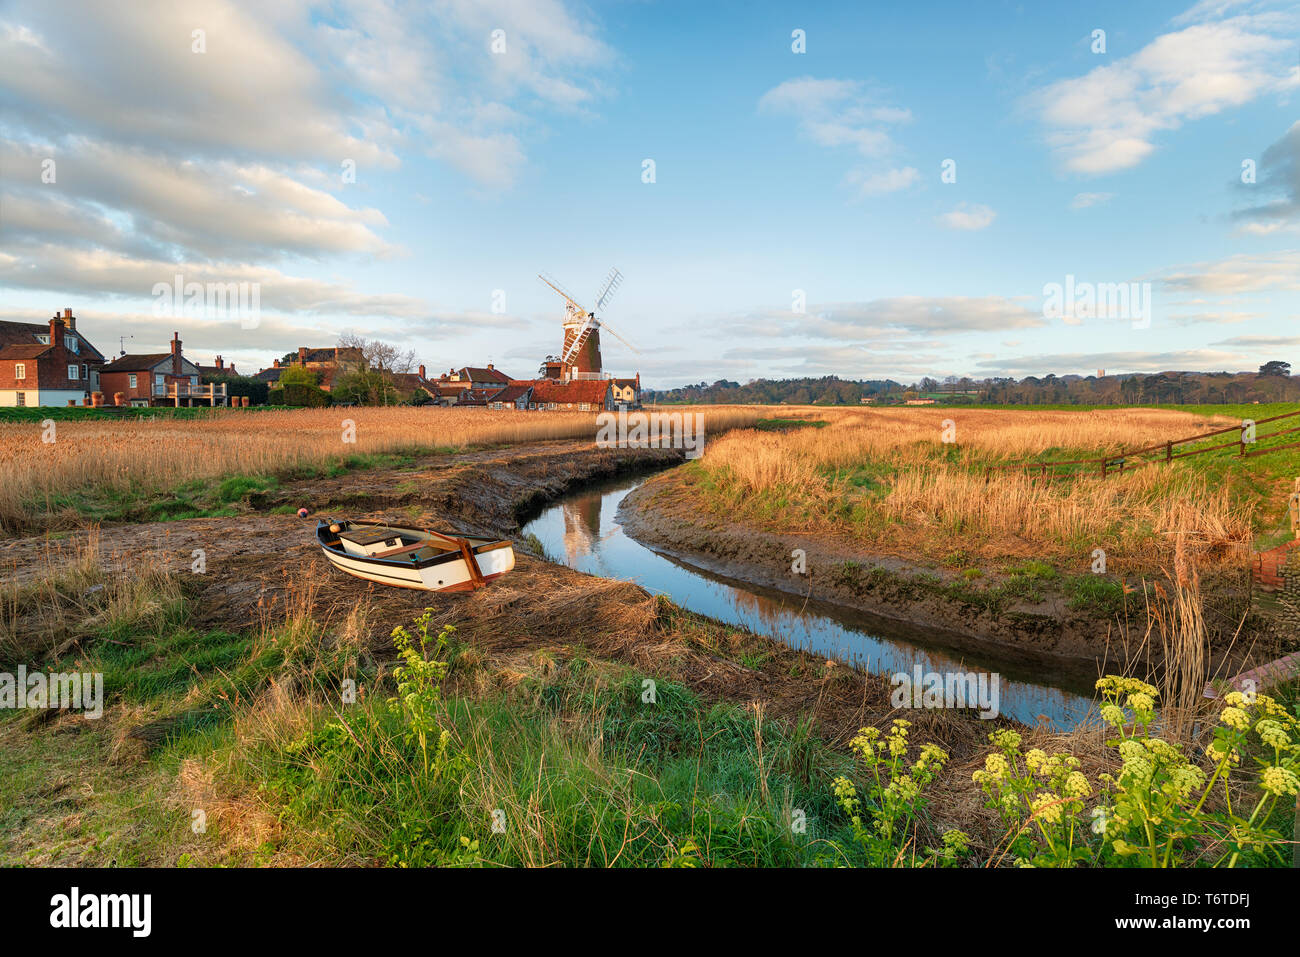 The windmill at Cley next the Sea, a pretty village on the river Glaven on the north coast of Norfolk Stock Photo